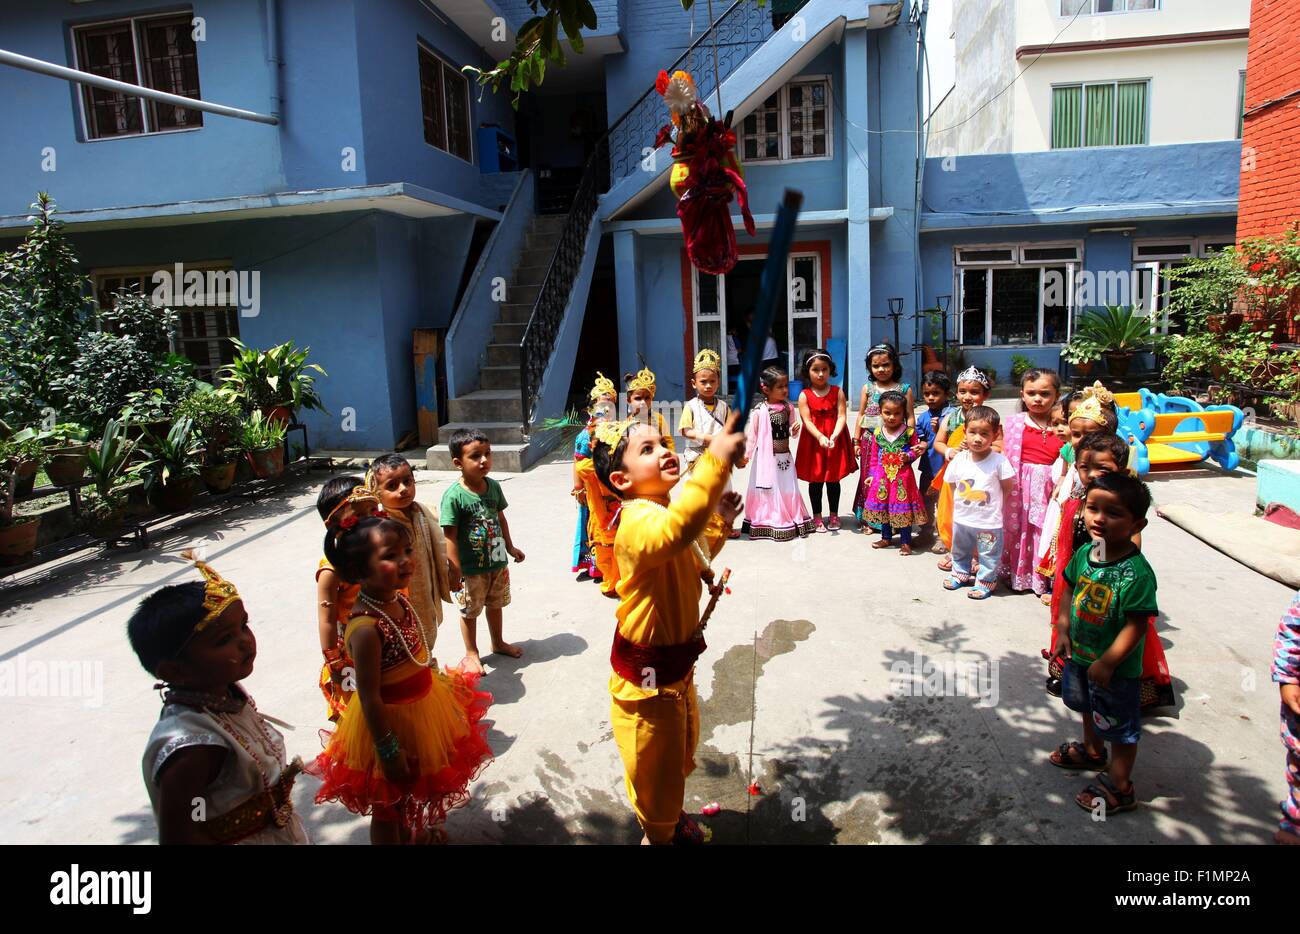 Kathmandu, Nepal. 4th Sep, 2015. Children dressed up as Radha and Lord Krishna play games during the celebration on the eve of Janmashtami festival at a local school in Kathmandu, Nepal, Sept. 4, 2015. Janmashtami festival, which marks the birthday of Hindu god Krishna, will be celebrated on Sept. 5. Credit:  Sunil Sharma/Xinhua/Alamy Live News Stock Photo